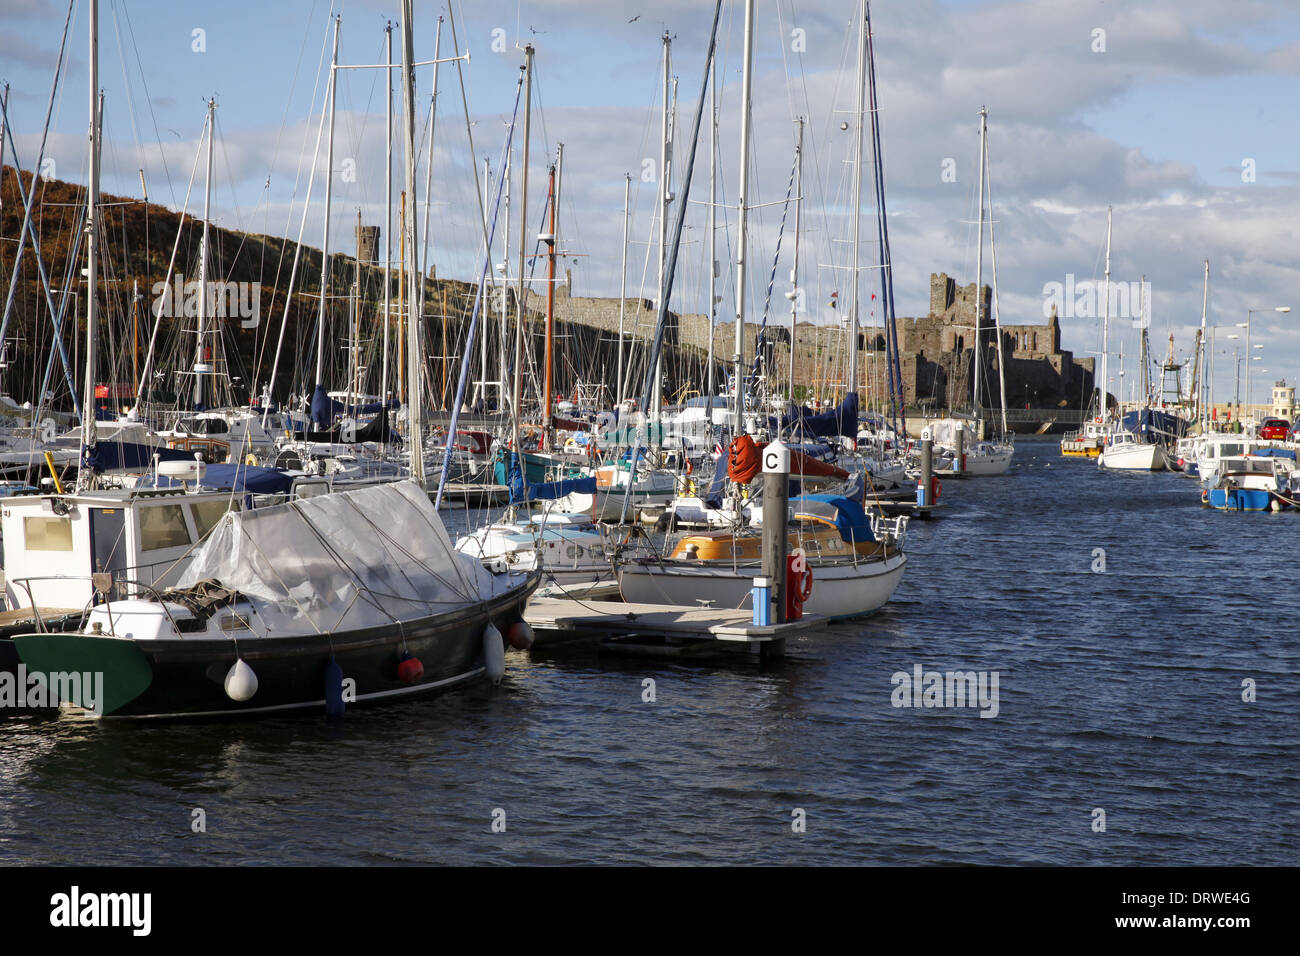 YACHTS IN HARBOUR & CASTLE PEEL ISLE OF MAN 10 October 2013 Stock Photo